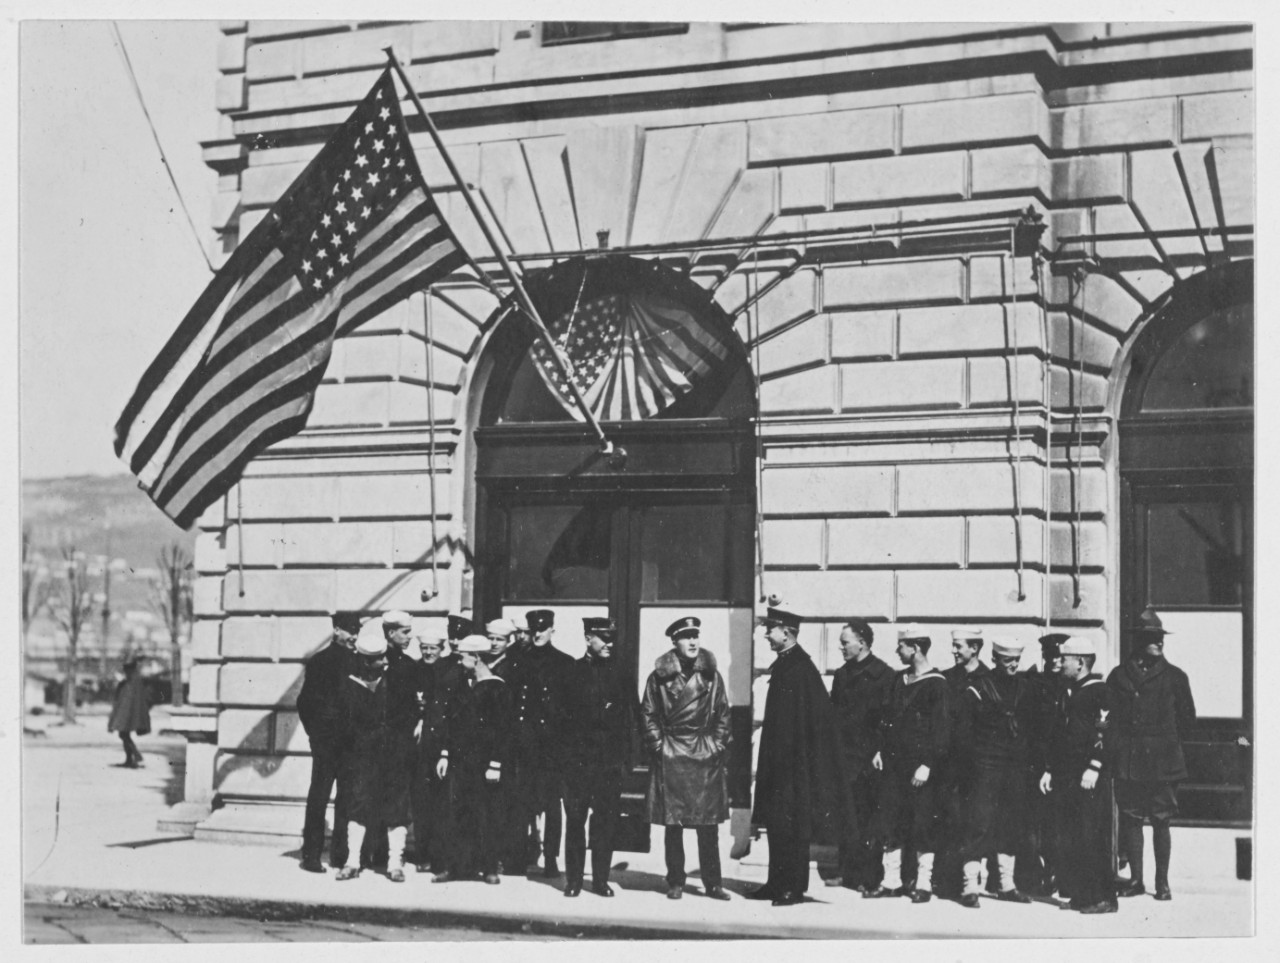 U.S. Navy Officers and men at Headquarters, Trieste, Austria. American flag flies outside building. Austria-Hungary.